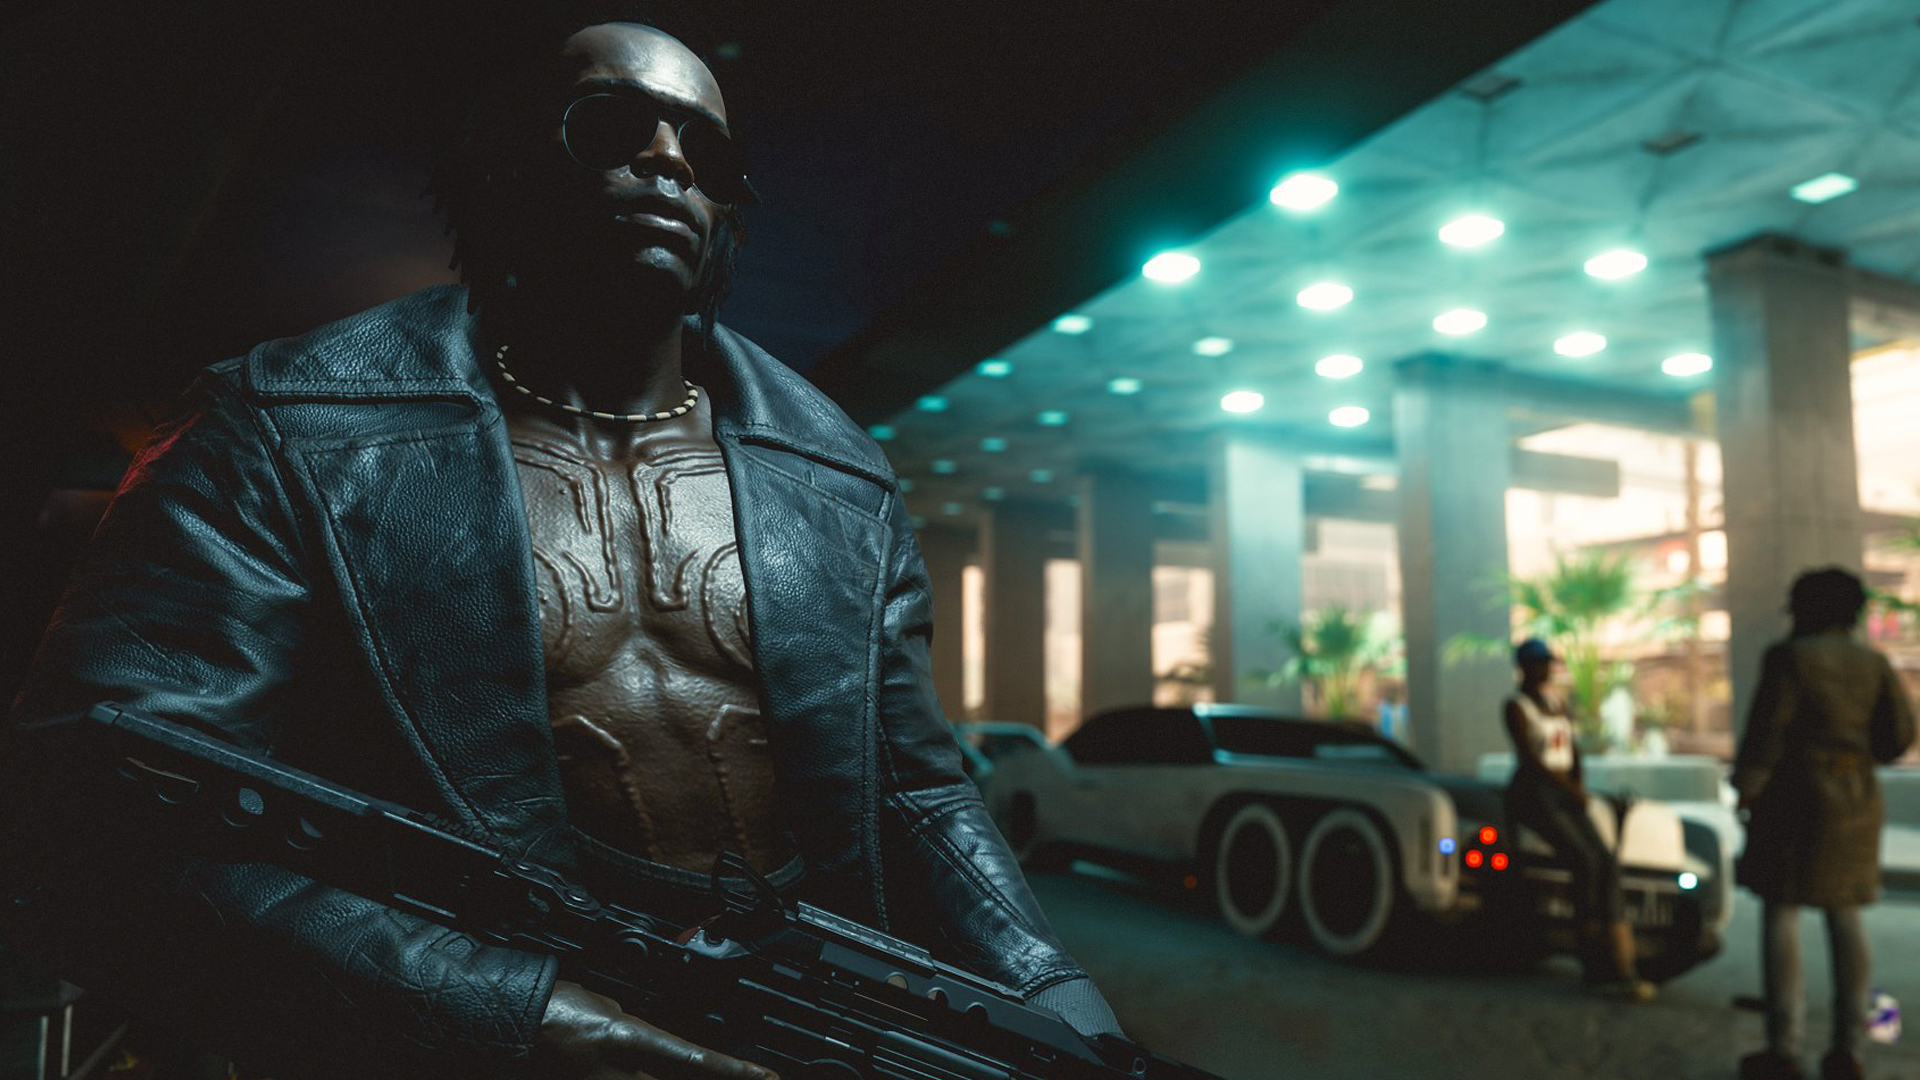  What can we expect from Cyberpunk 2077 builds? 